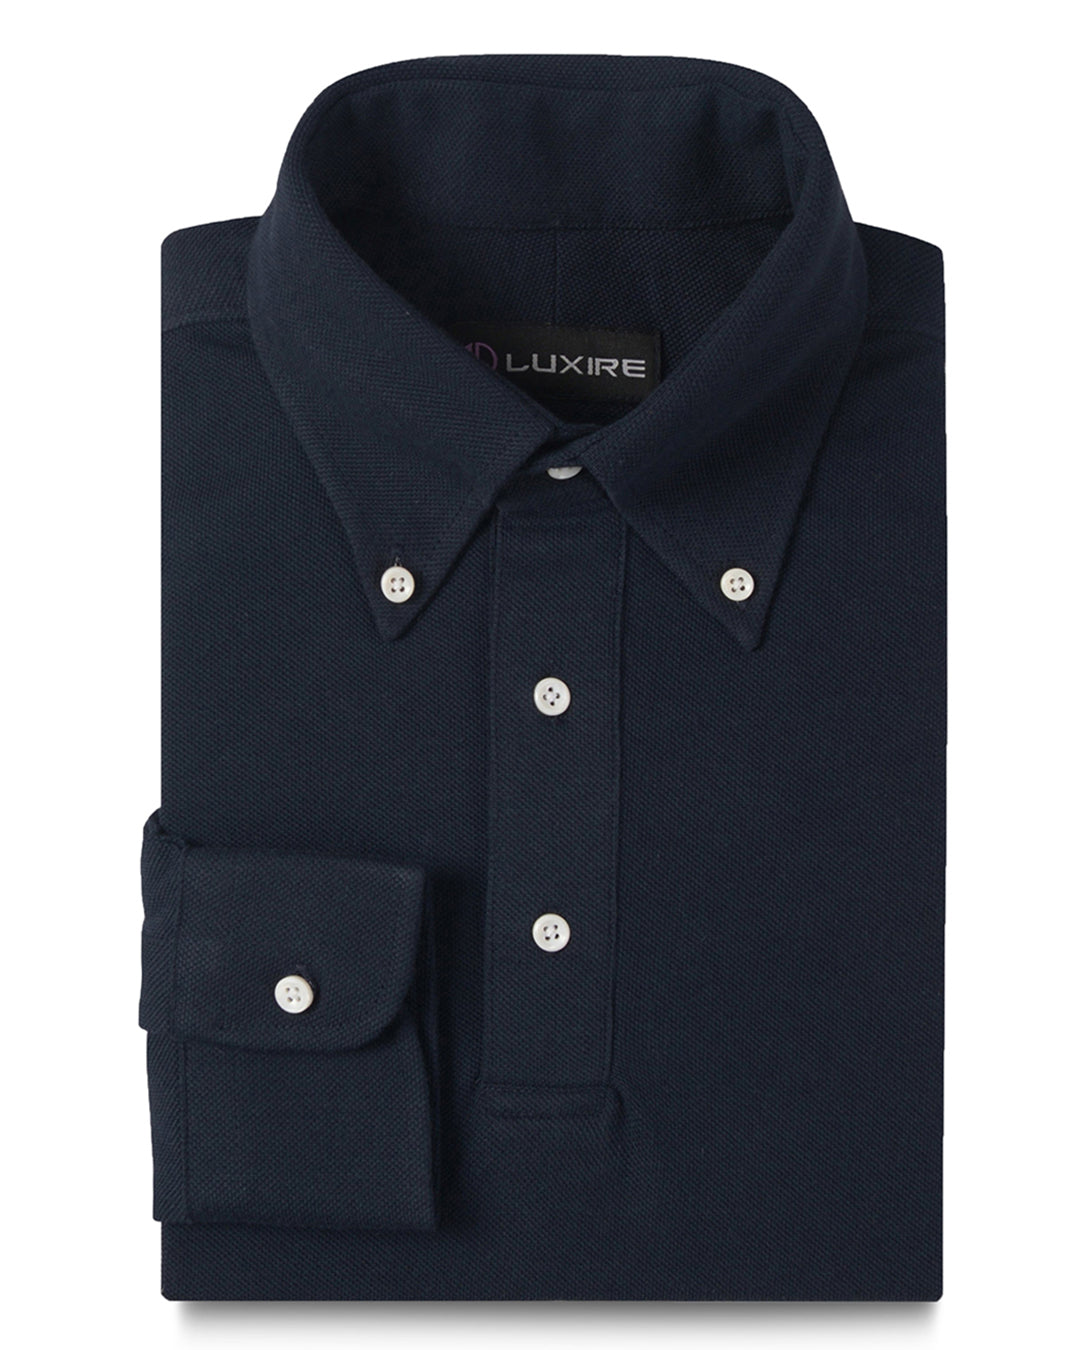 Front of the custom oxford polo shirt for men by Luxire in navy